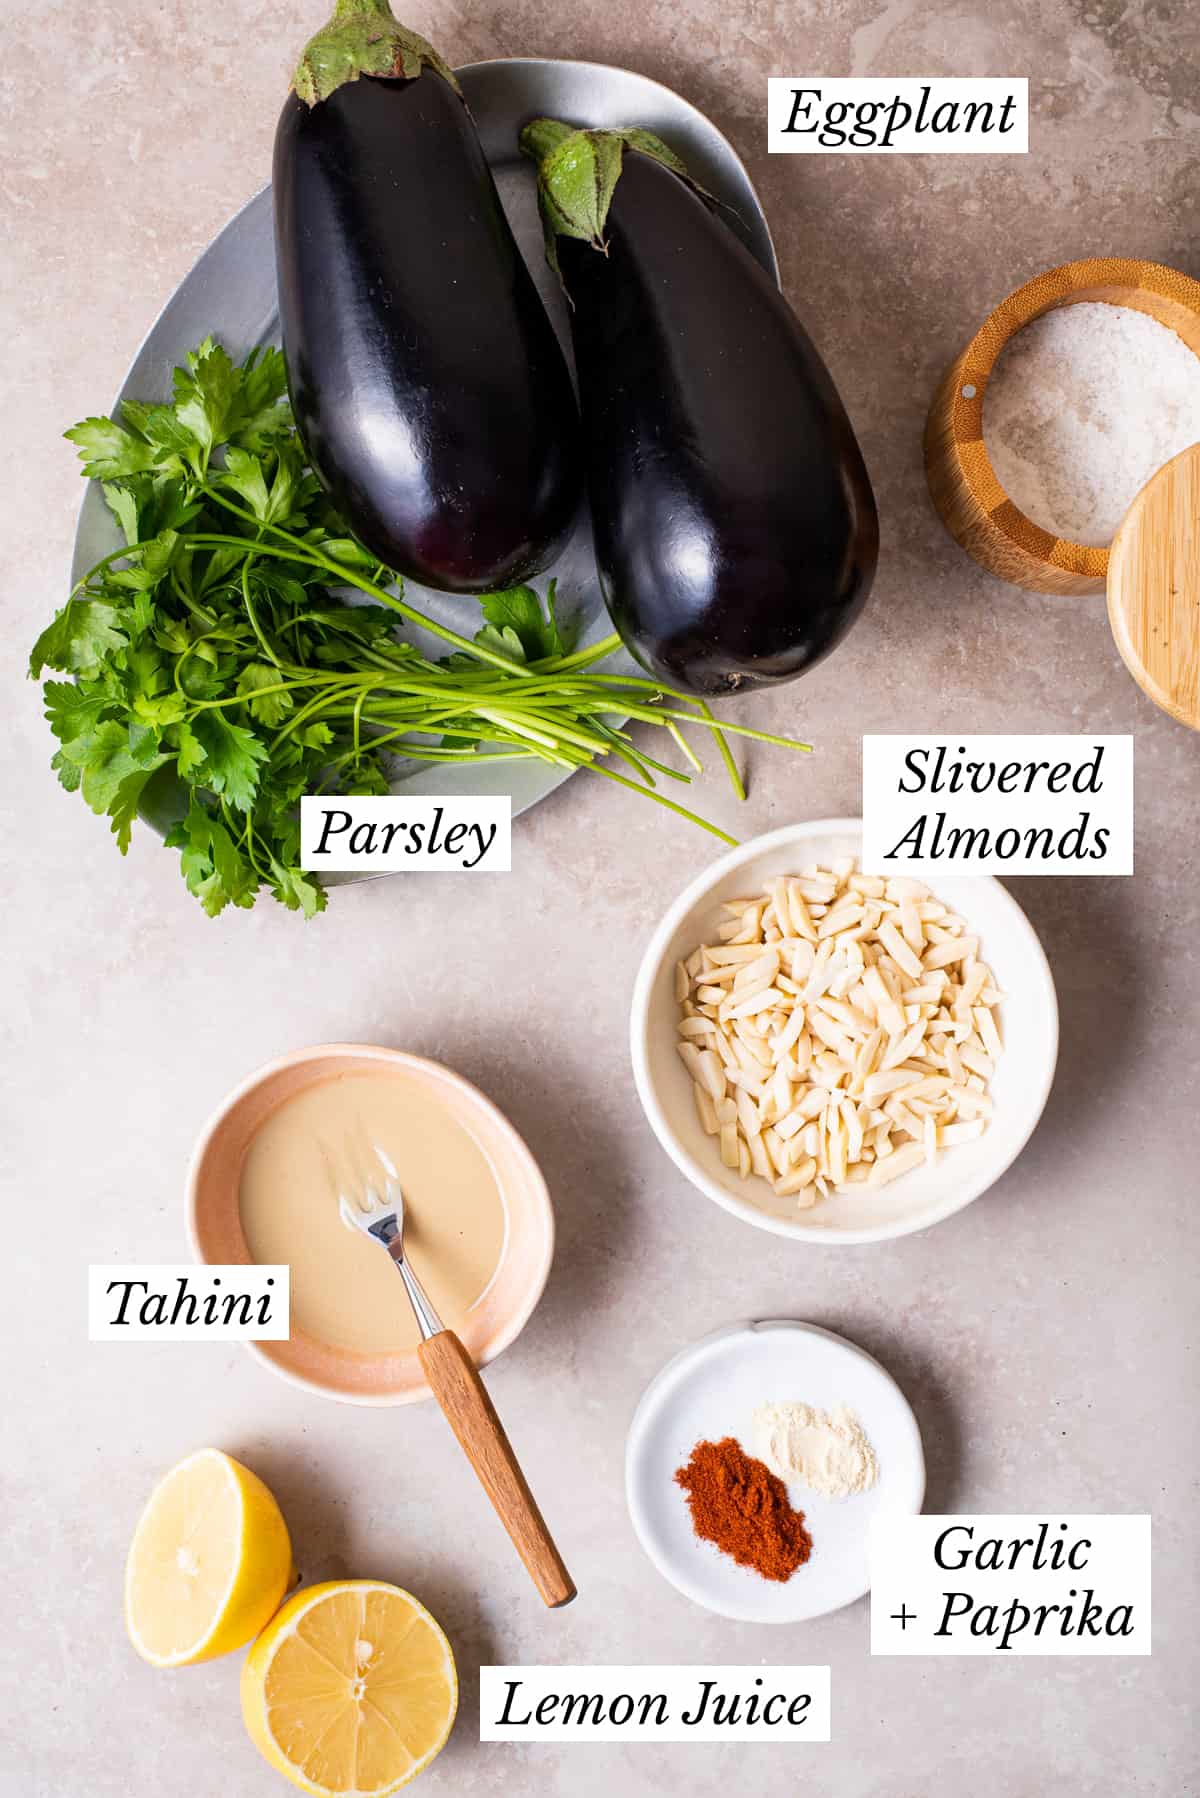 Ingredients gathered to make Ottolenghi eggplant with tahini sauce.